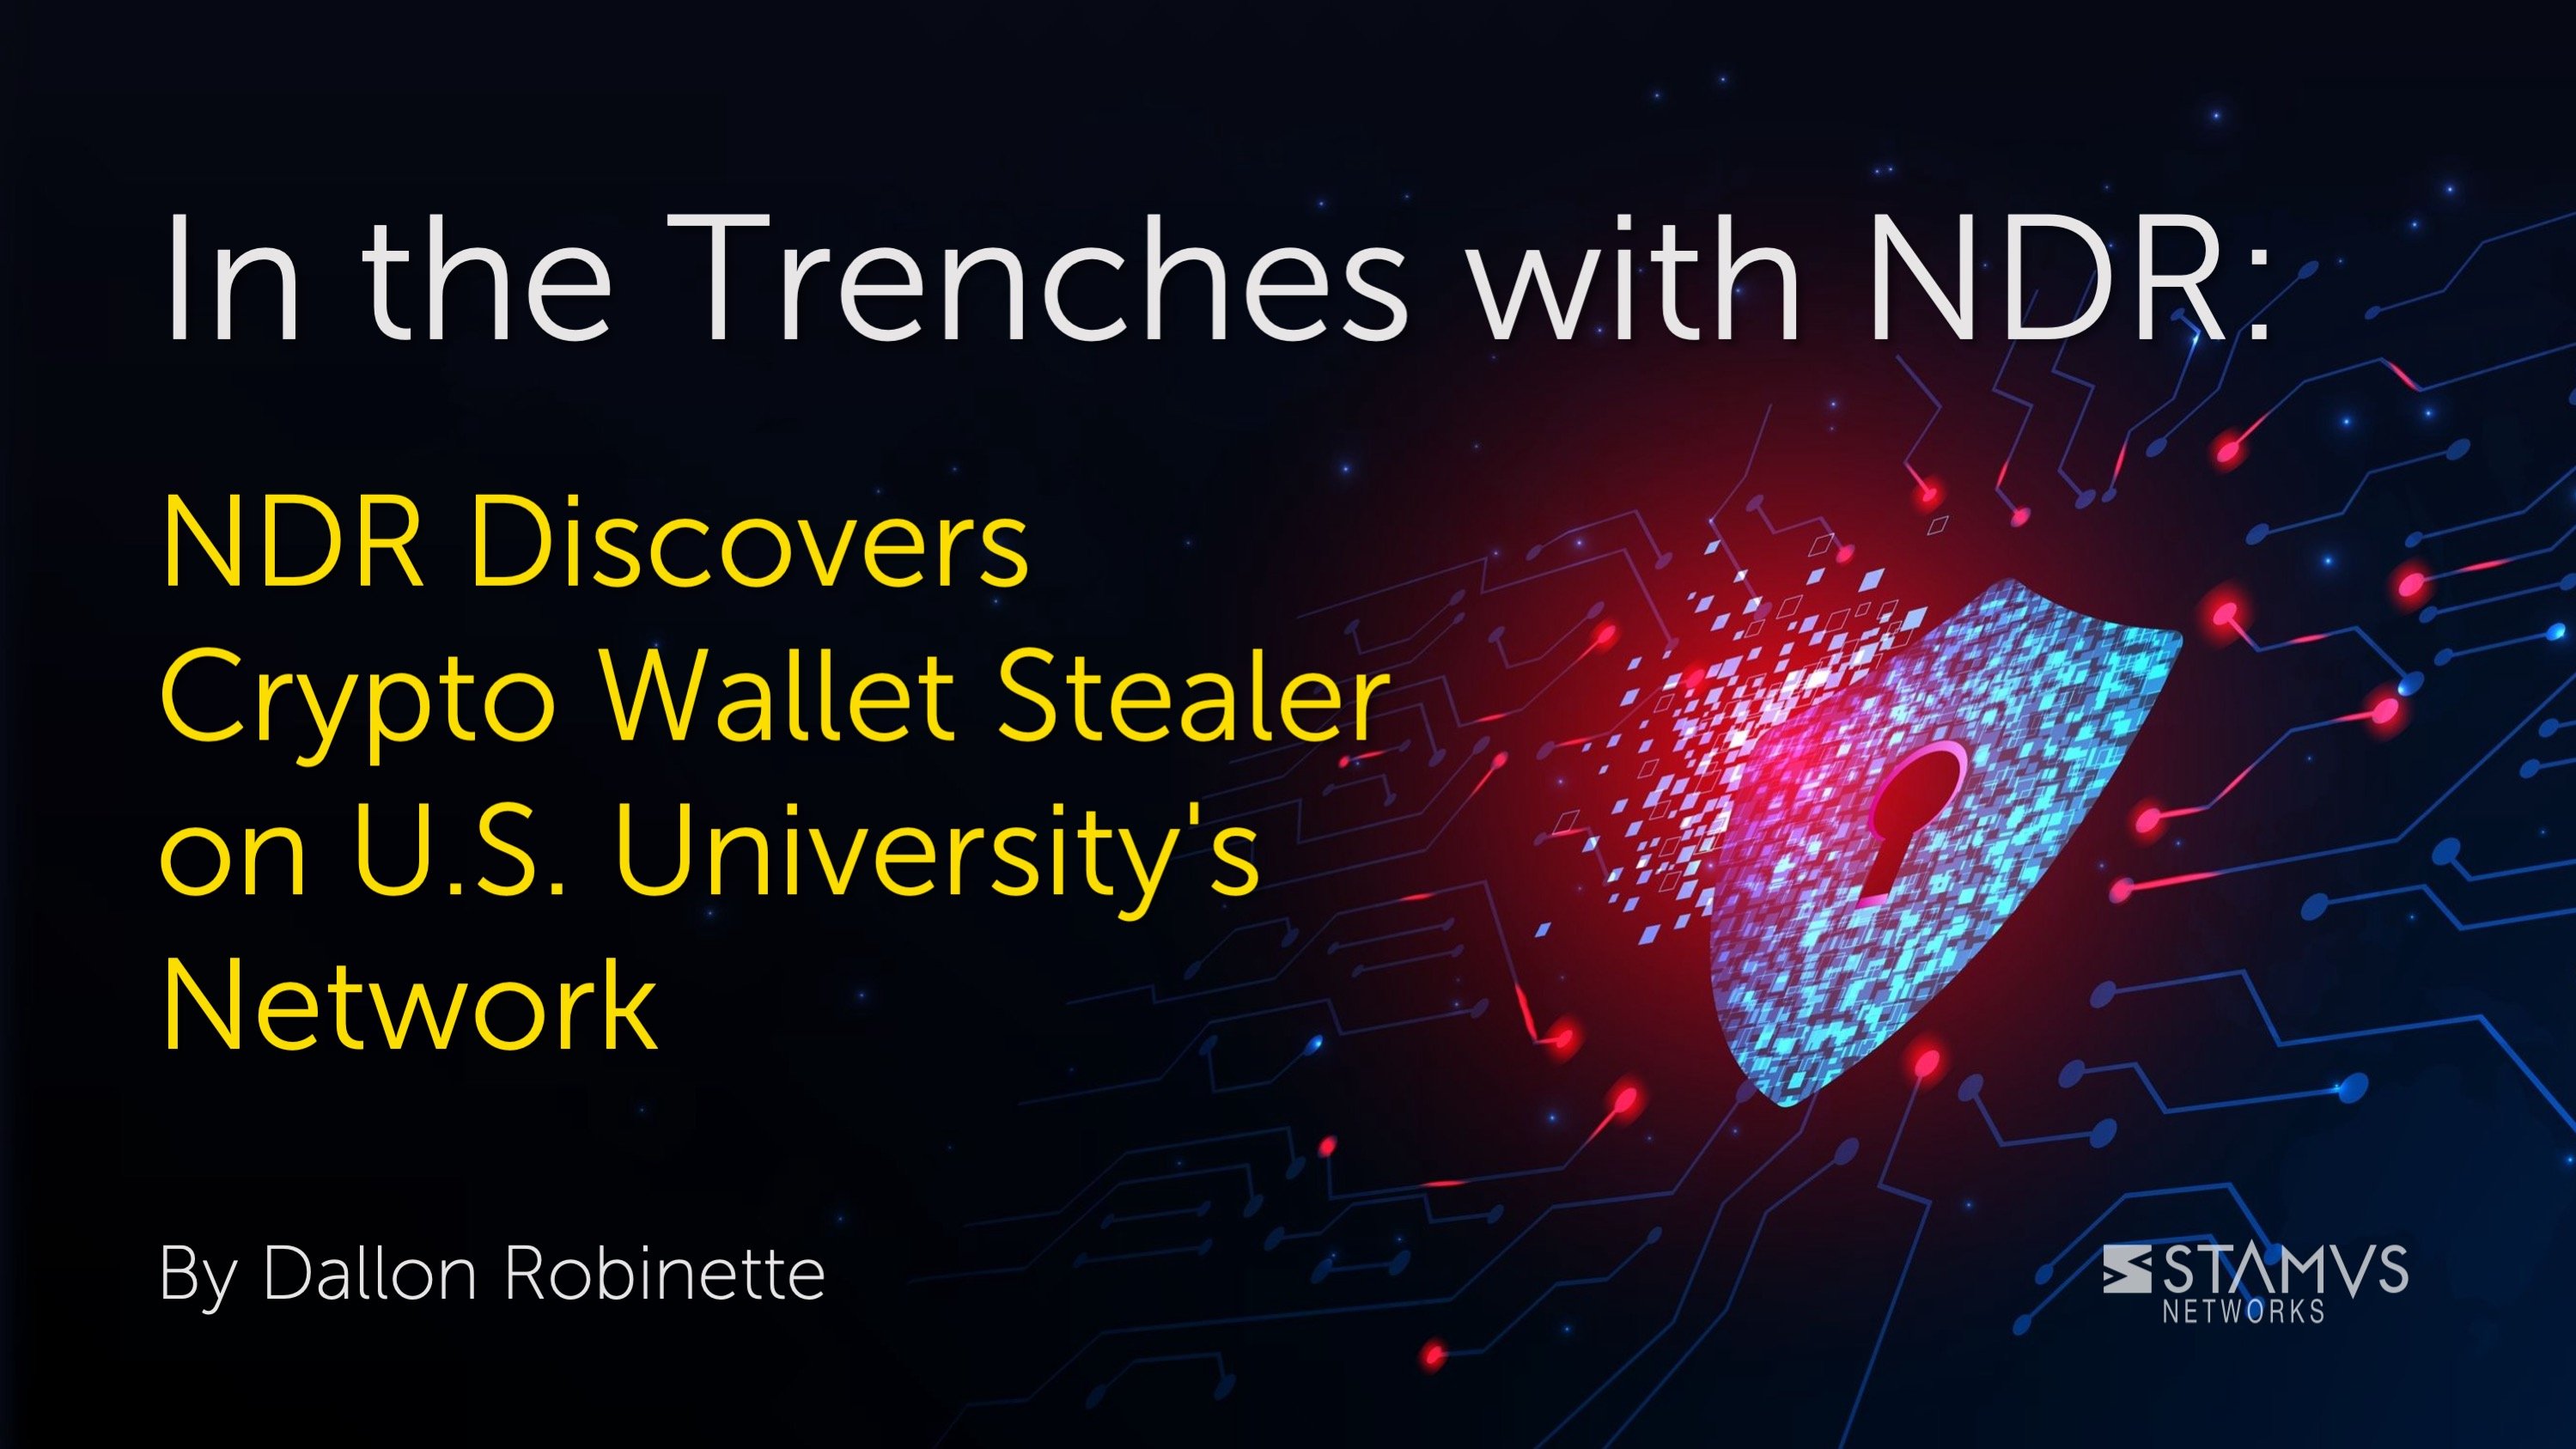 In the Trenches with NDR: NDR Discovers Crypto Wallet Stealer on U.S. University's Network by Dallon Robinette